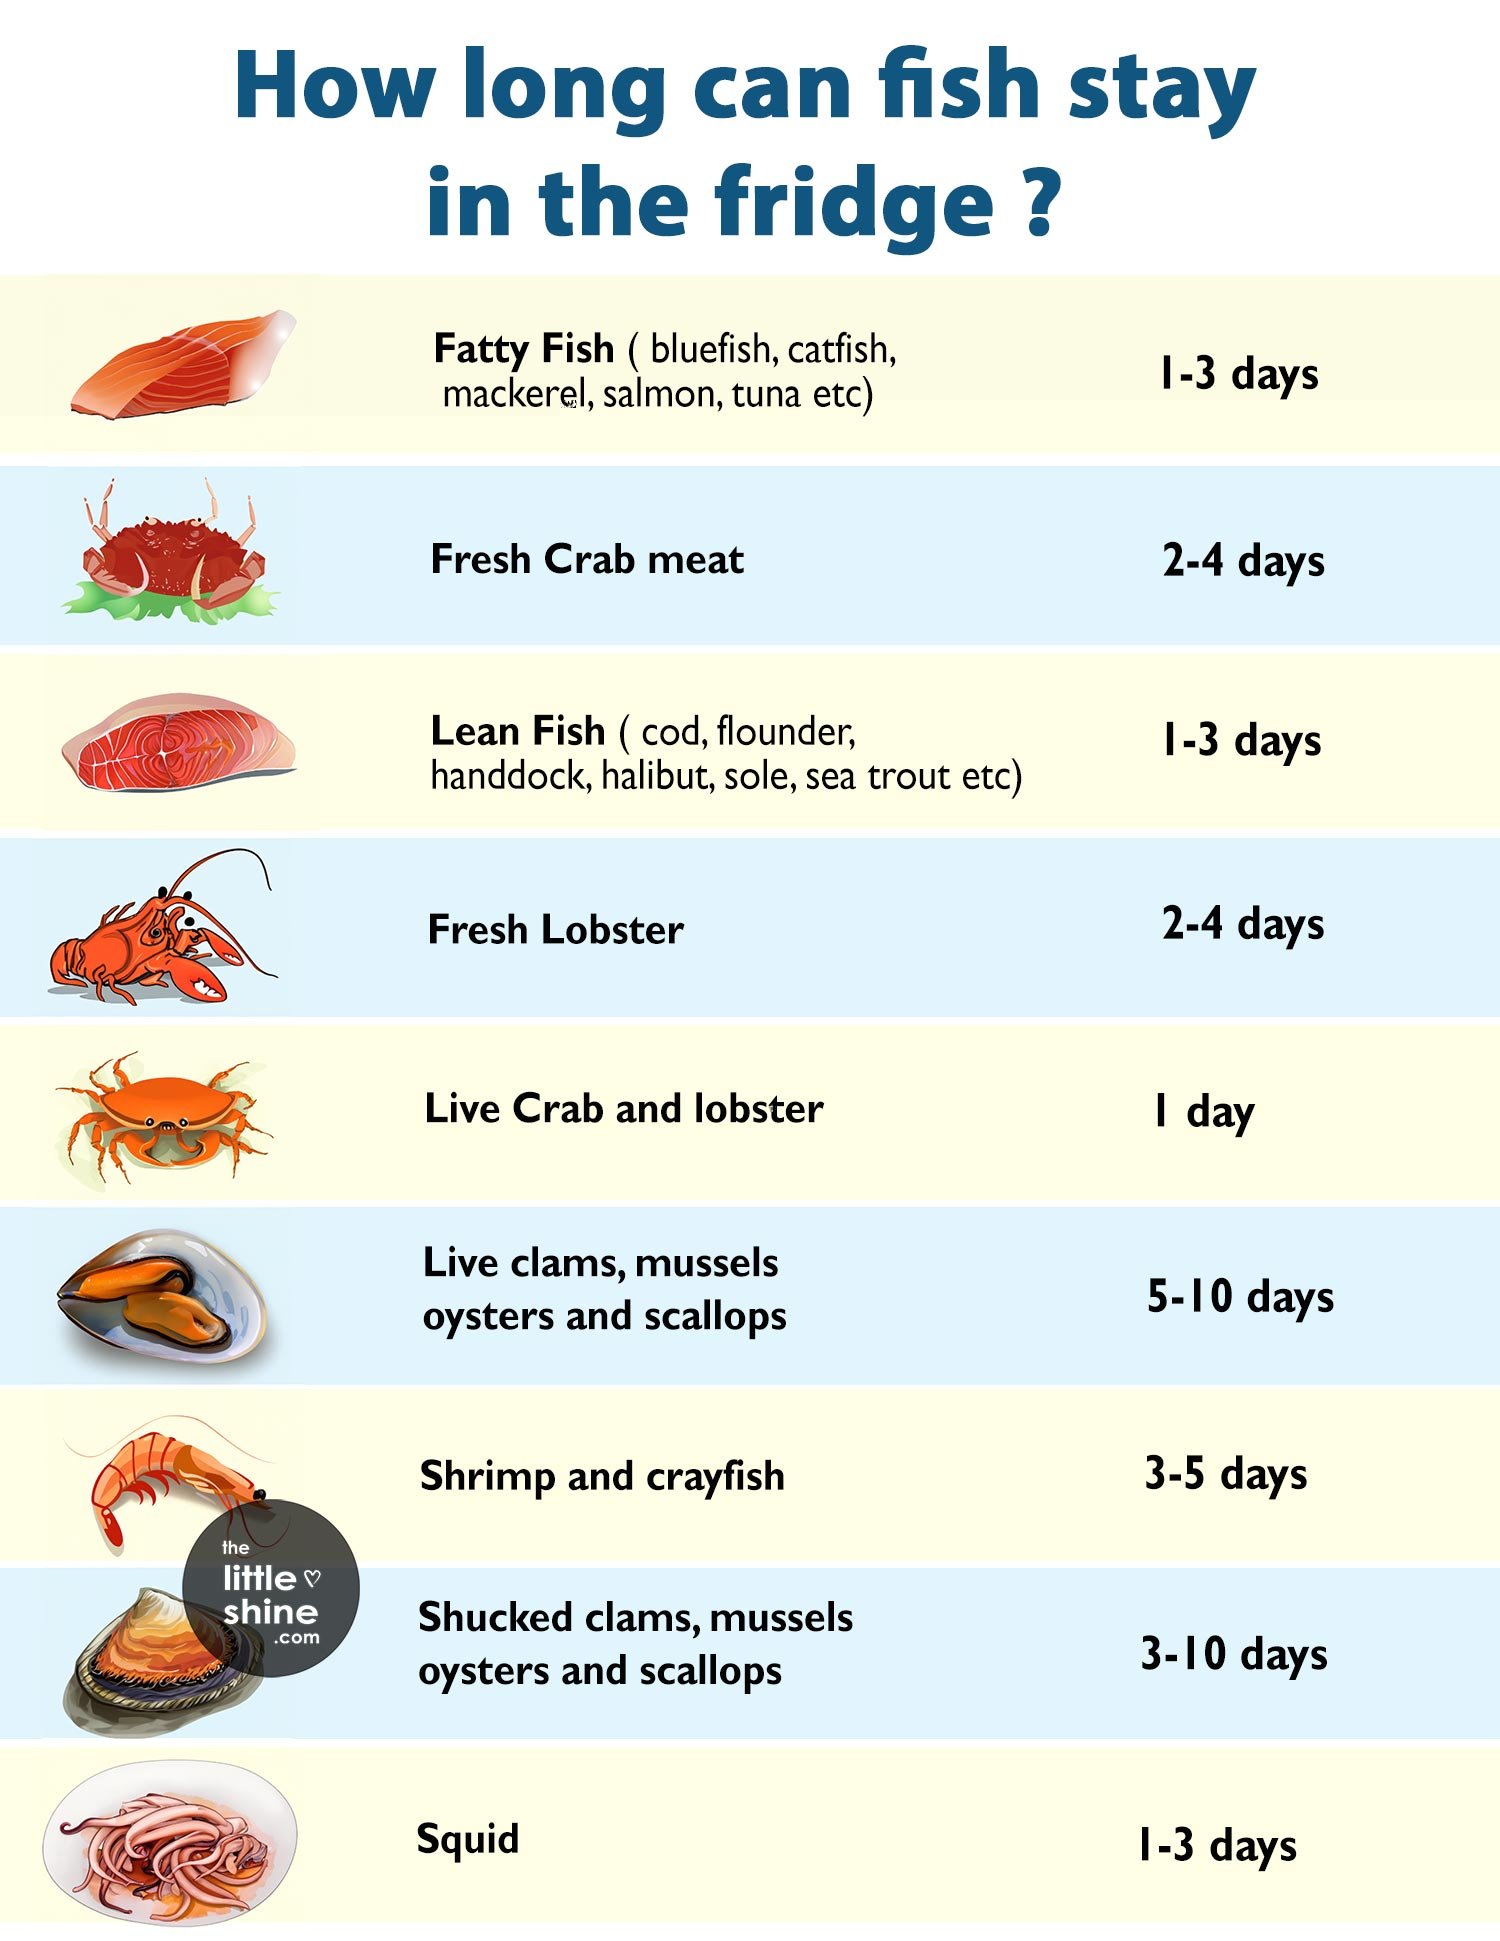 How Long Can Fish Stay in the Fridge and Freezer?